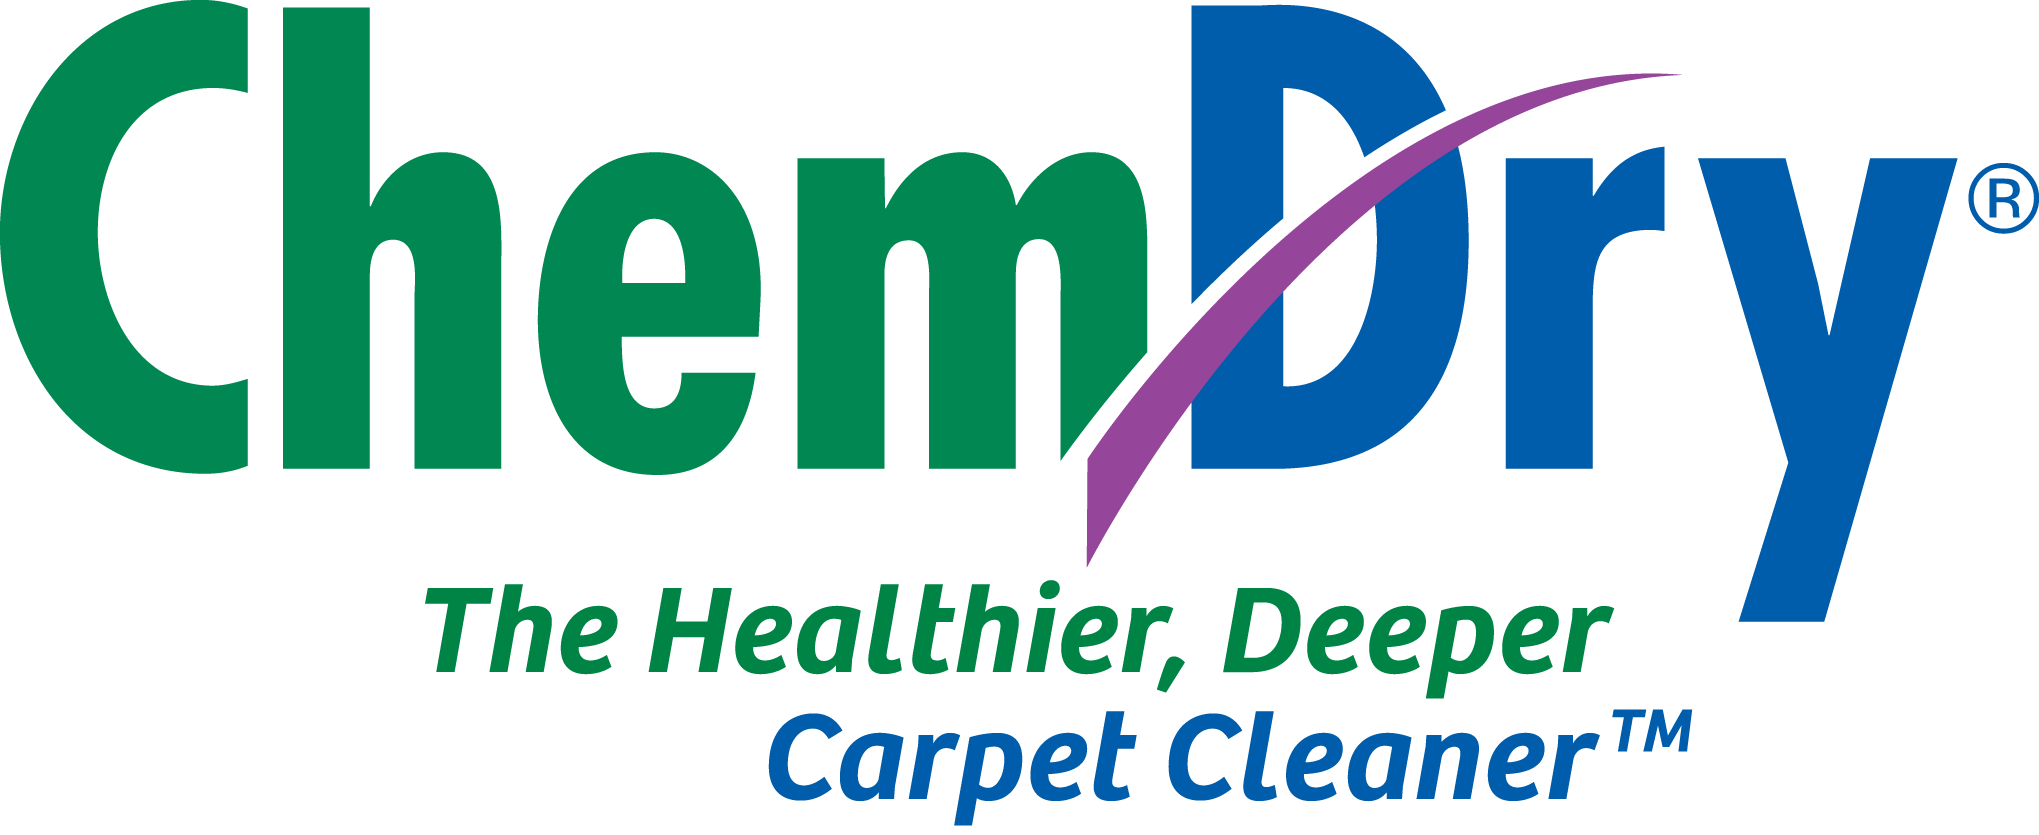 Viking Chem-Dry Carpet & Upholstery Cleaning in Plymouth, MN Logo